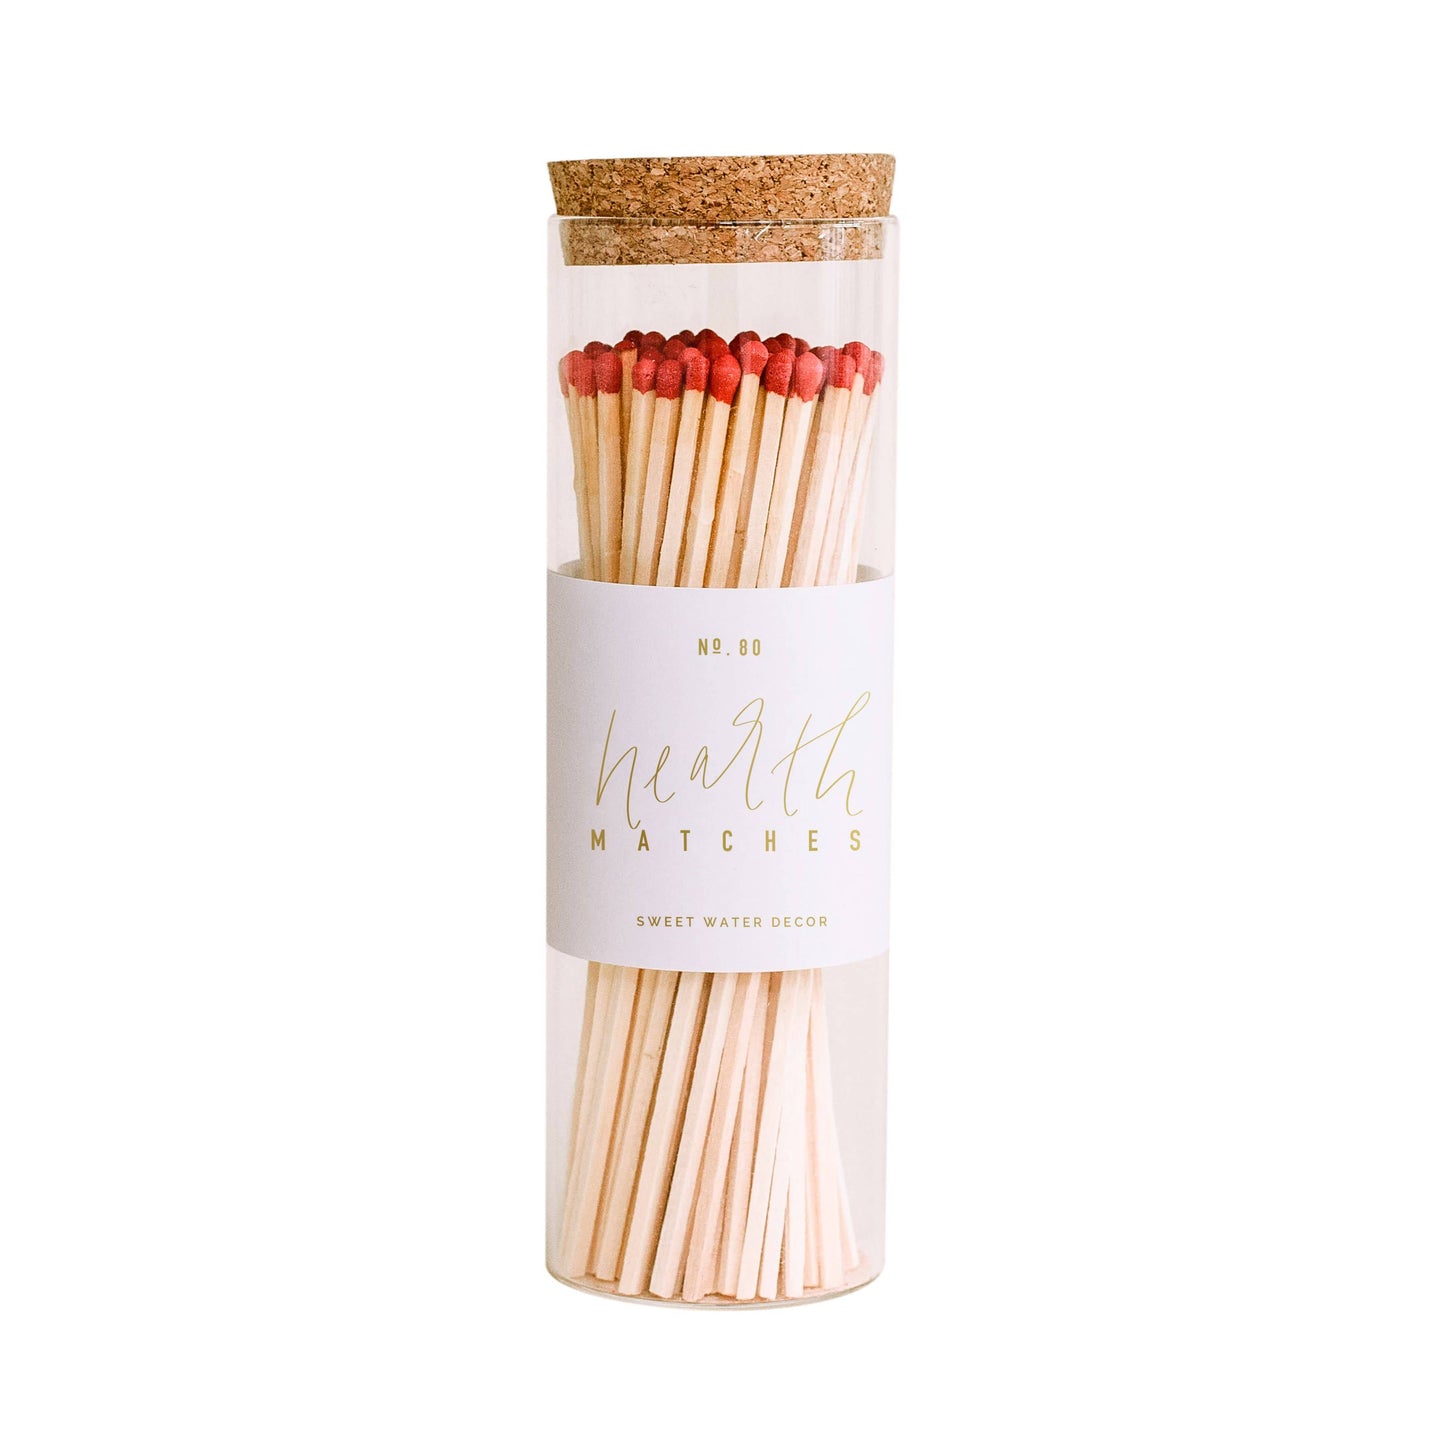 Sweet Water Decor - Hearth Matches - Red Tip - 80 Count, 7"